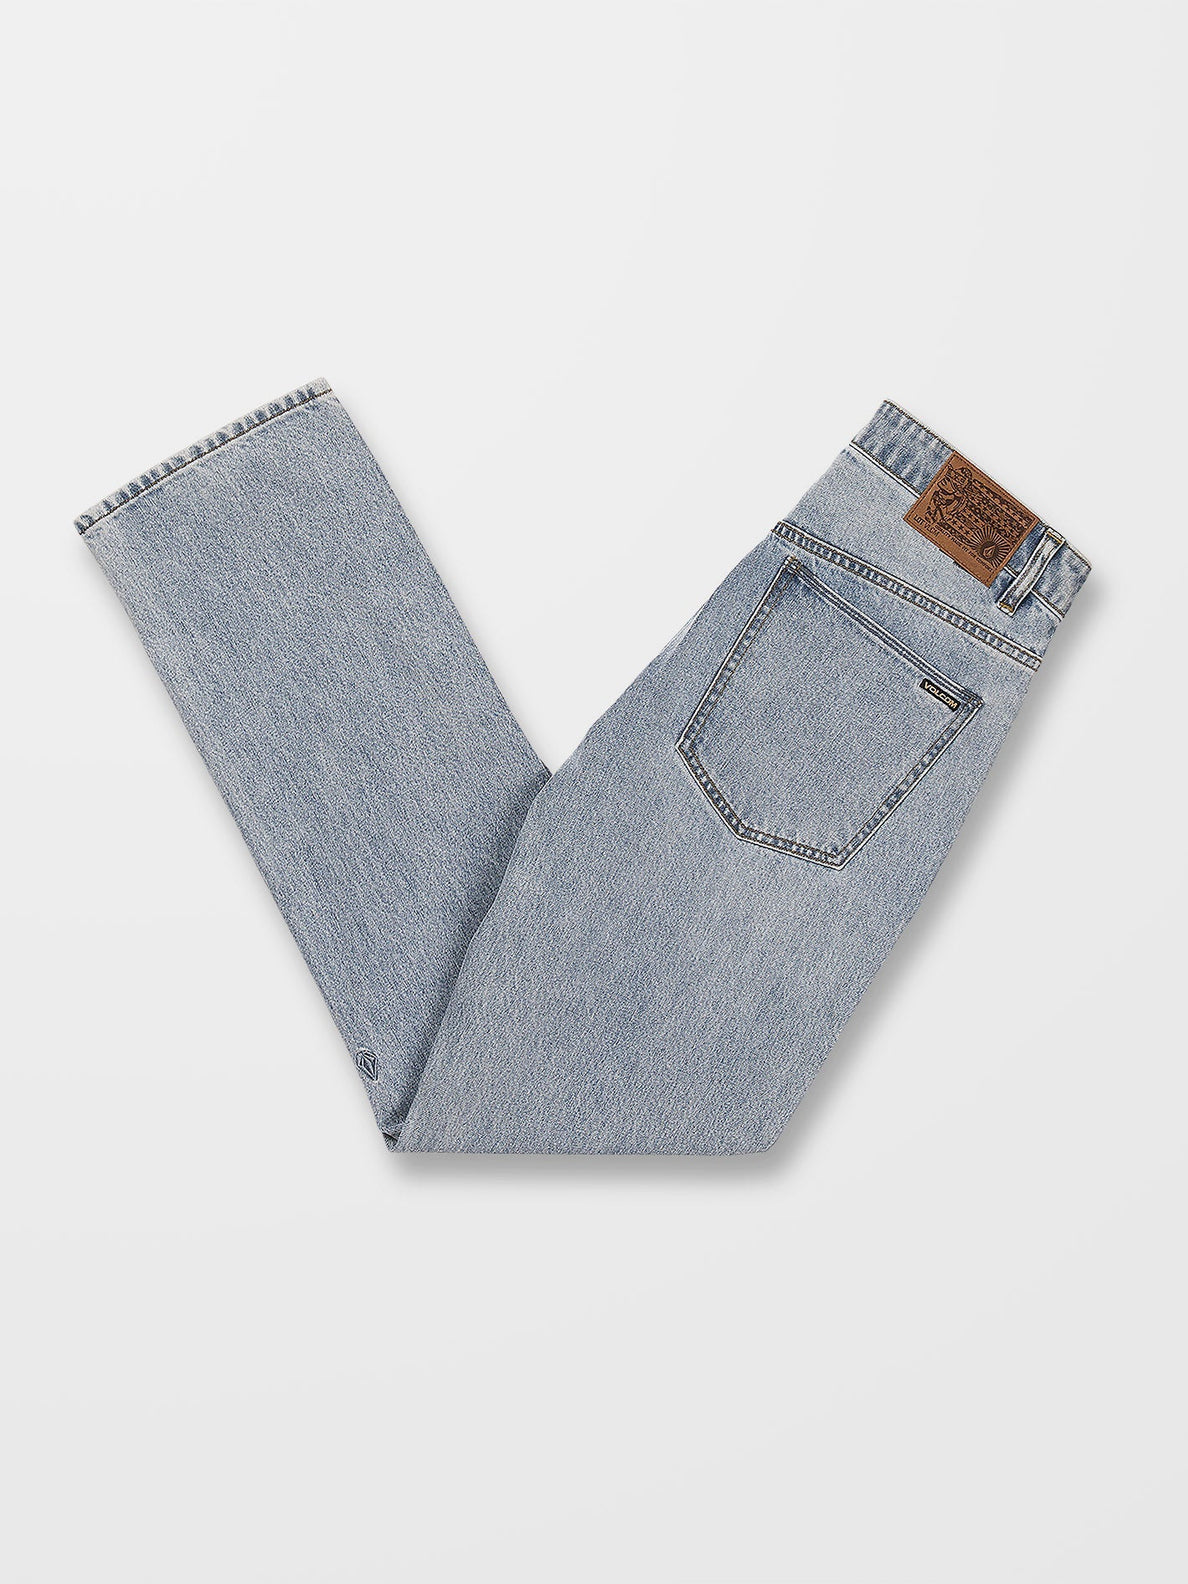 Solver Jeans - HEAVY WORN FADED (A1912303_HWR) [4]